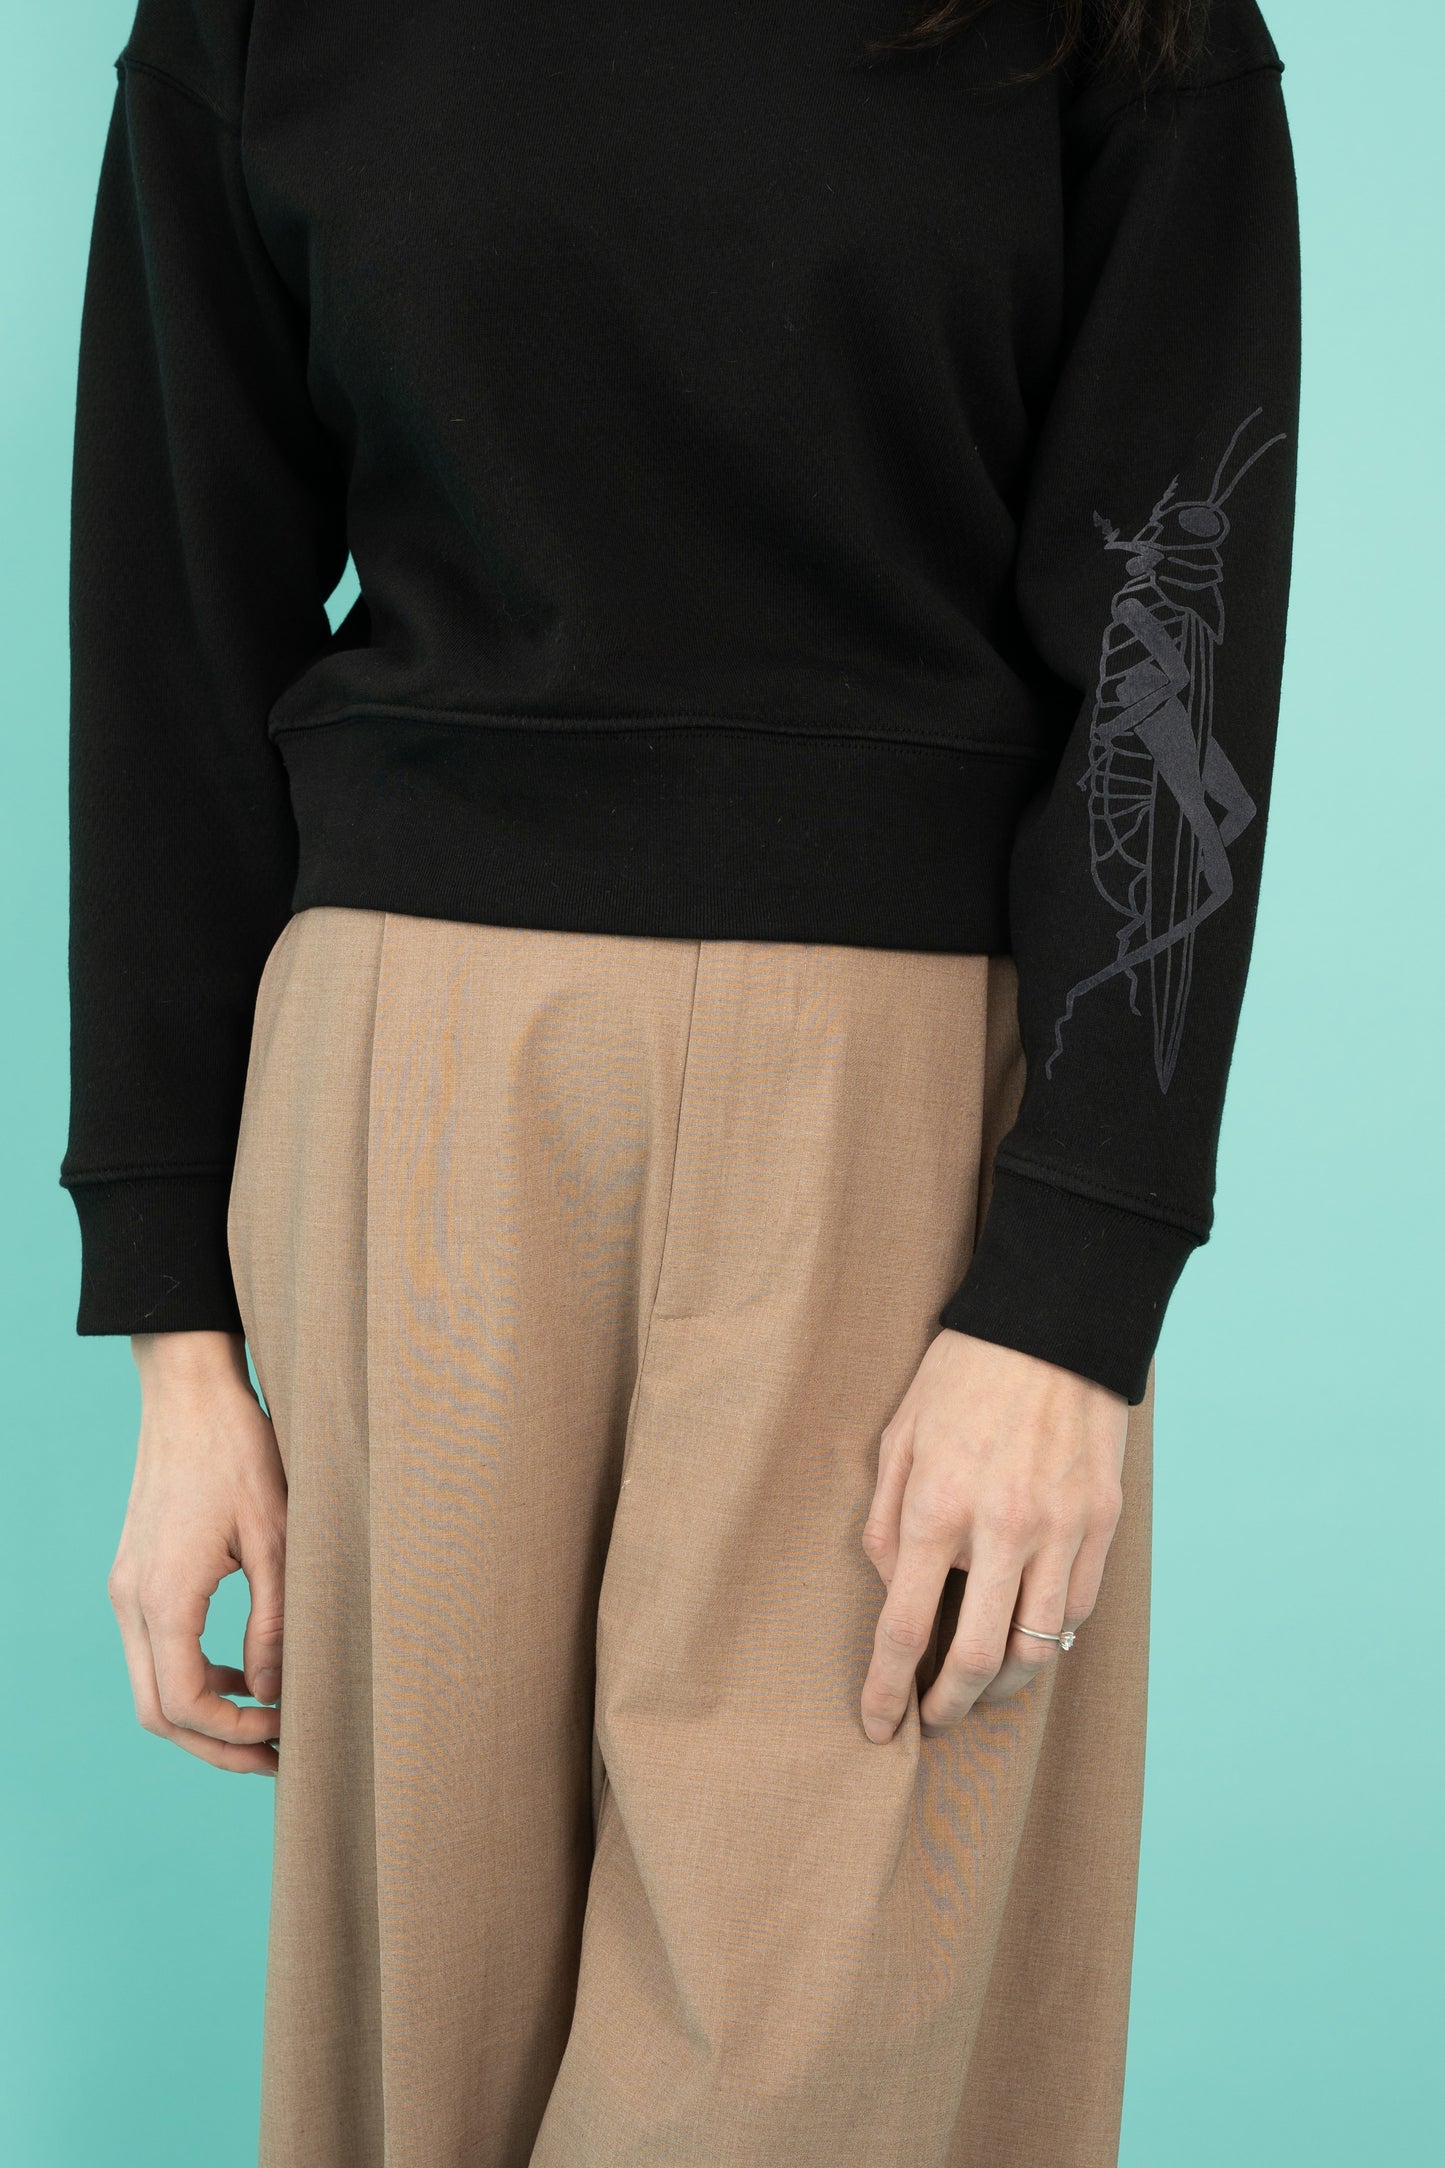 Black cropped crew neck sweatshirt with a grasshopper on the sleeve